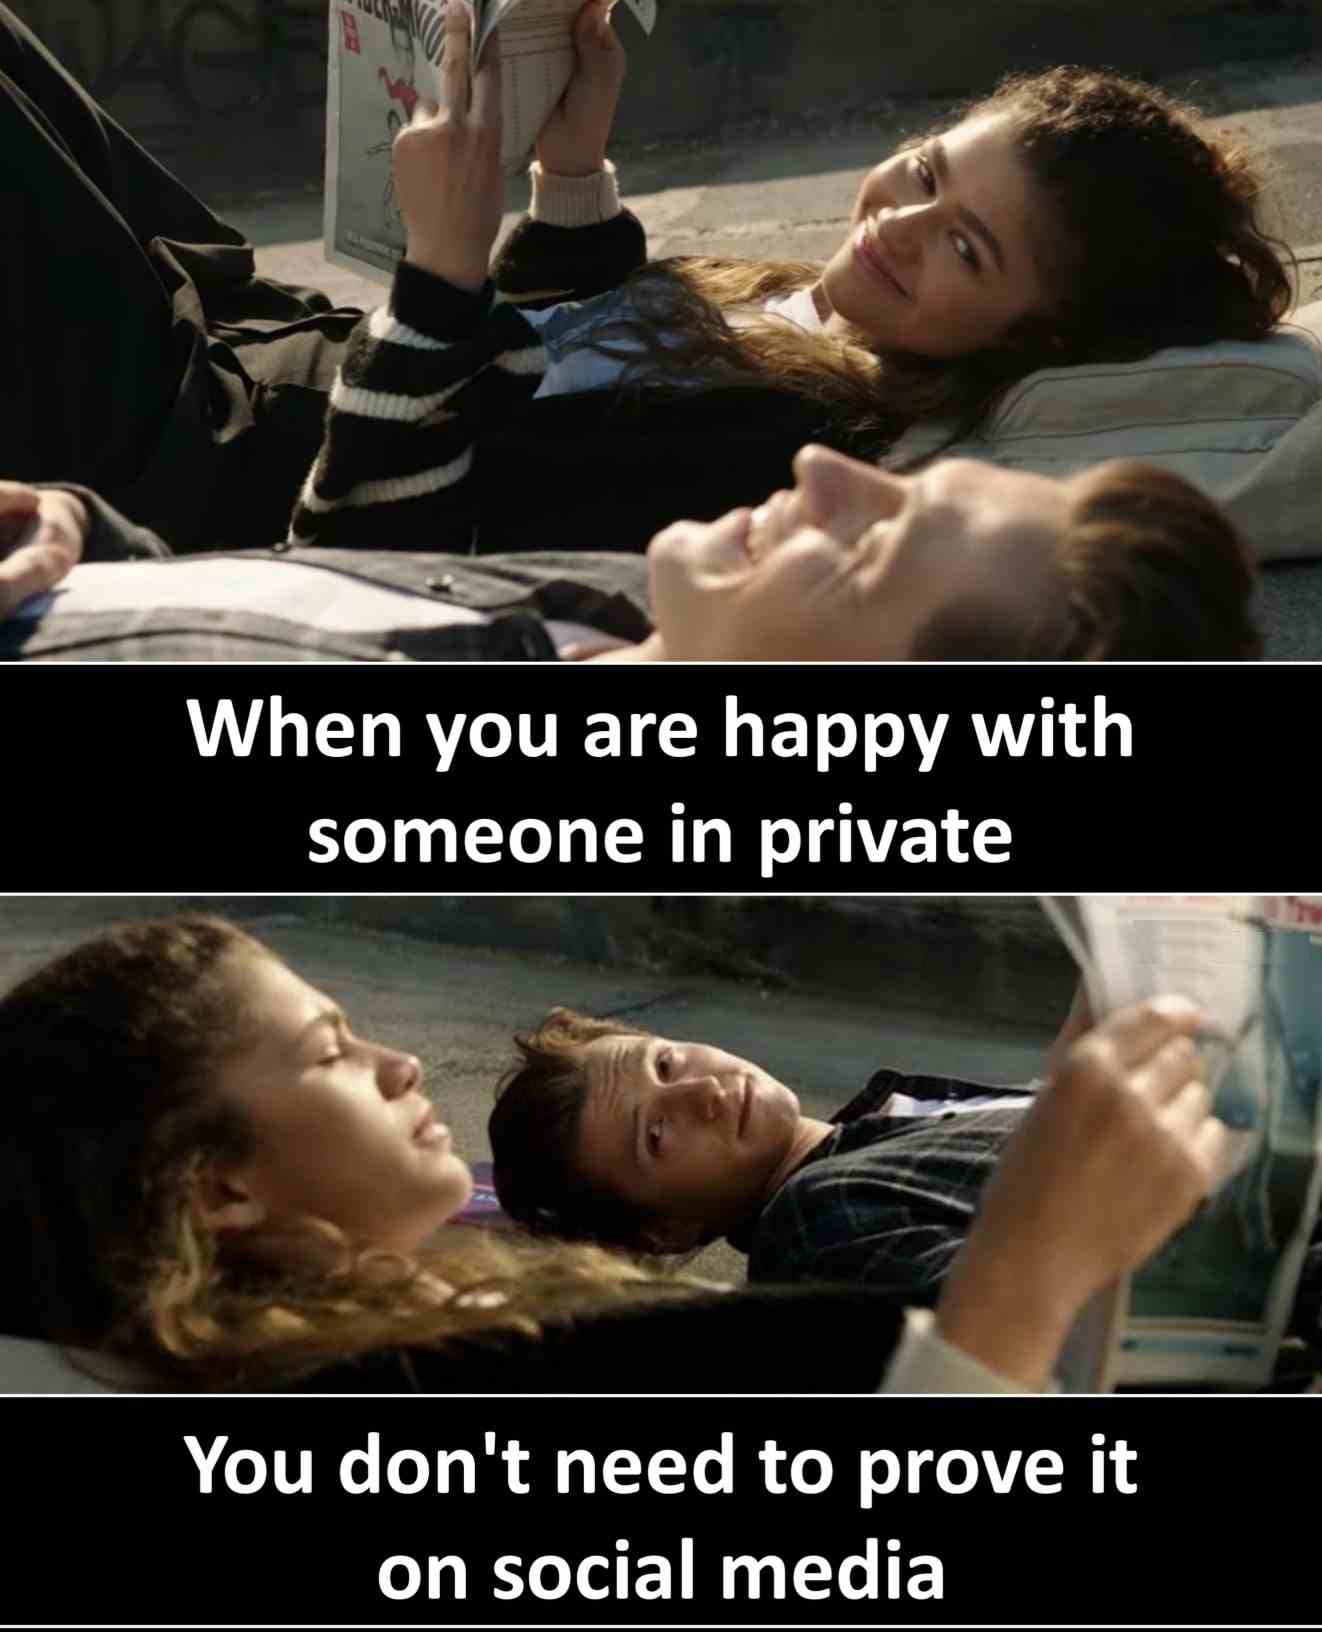 When you are happy with someone in private